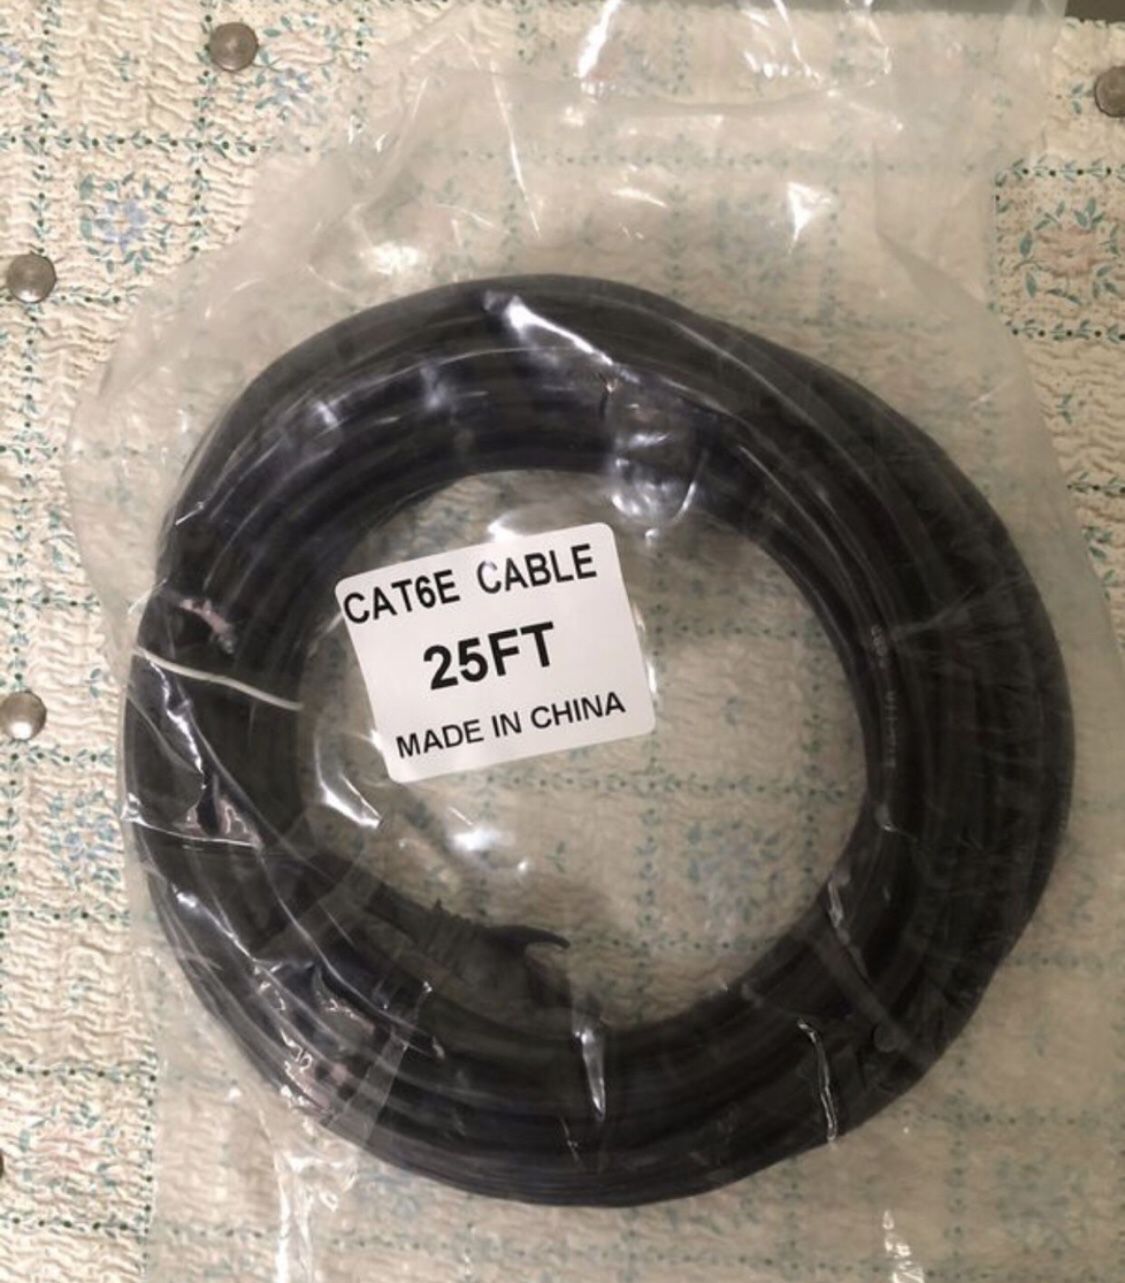 LINE 6, 25 ft CAT 6 Ethernet cable BRAND NEW for Line 6 FBV EXPRESS or MKII FOOT CONTROLLER, POD, 25 ft CAT, fender, guitar, bass, amp, computer rout